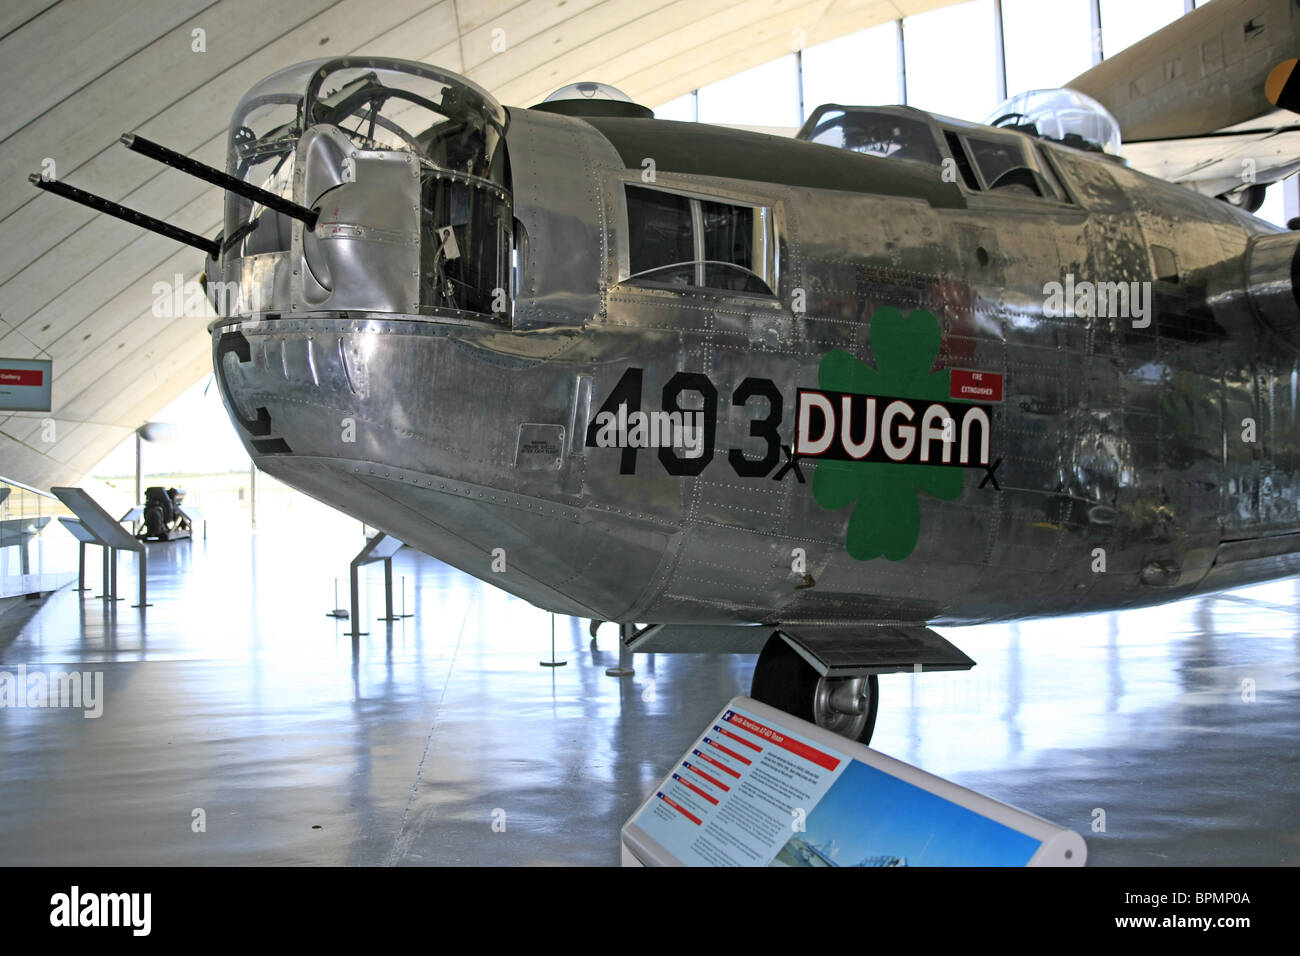 A B24 Liberator ww2 Bomber plane on display at the American Air Museum IWM Duxford Stock Photo